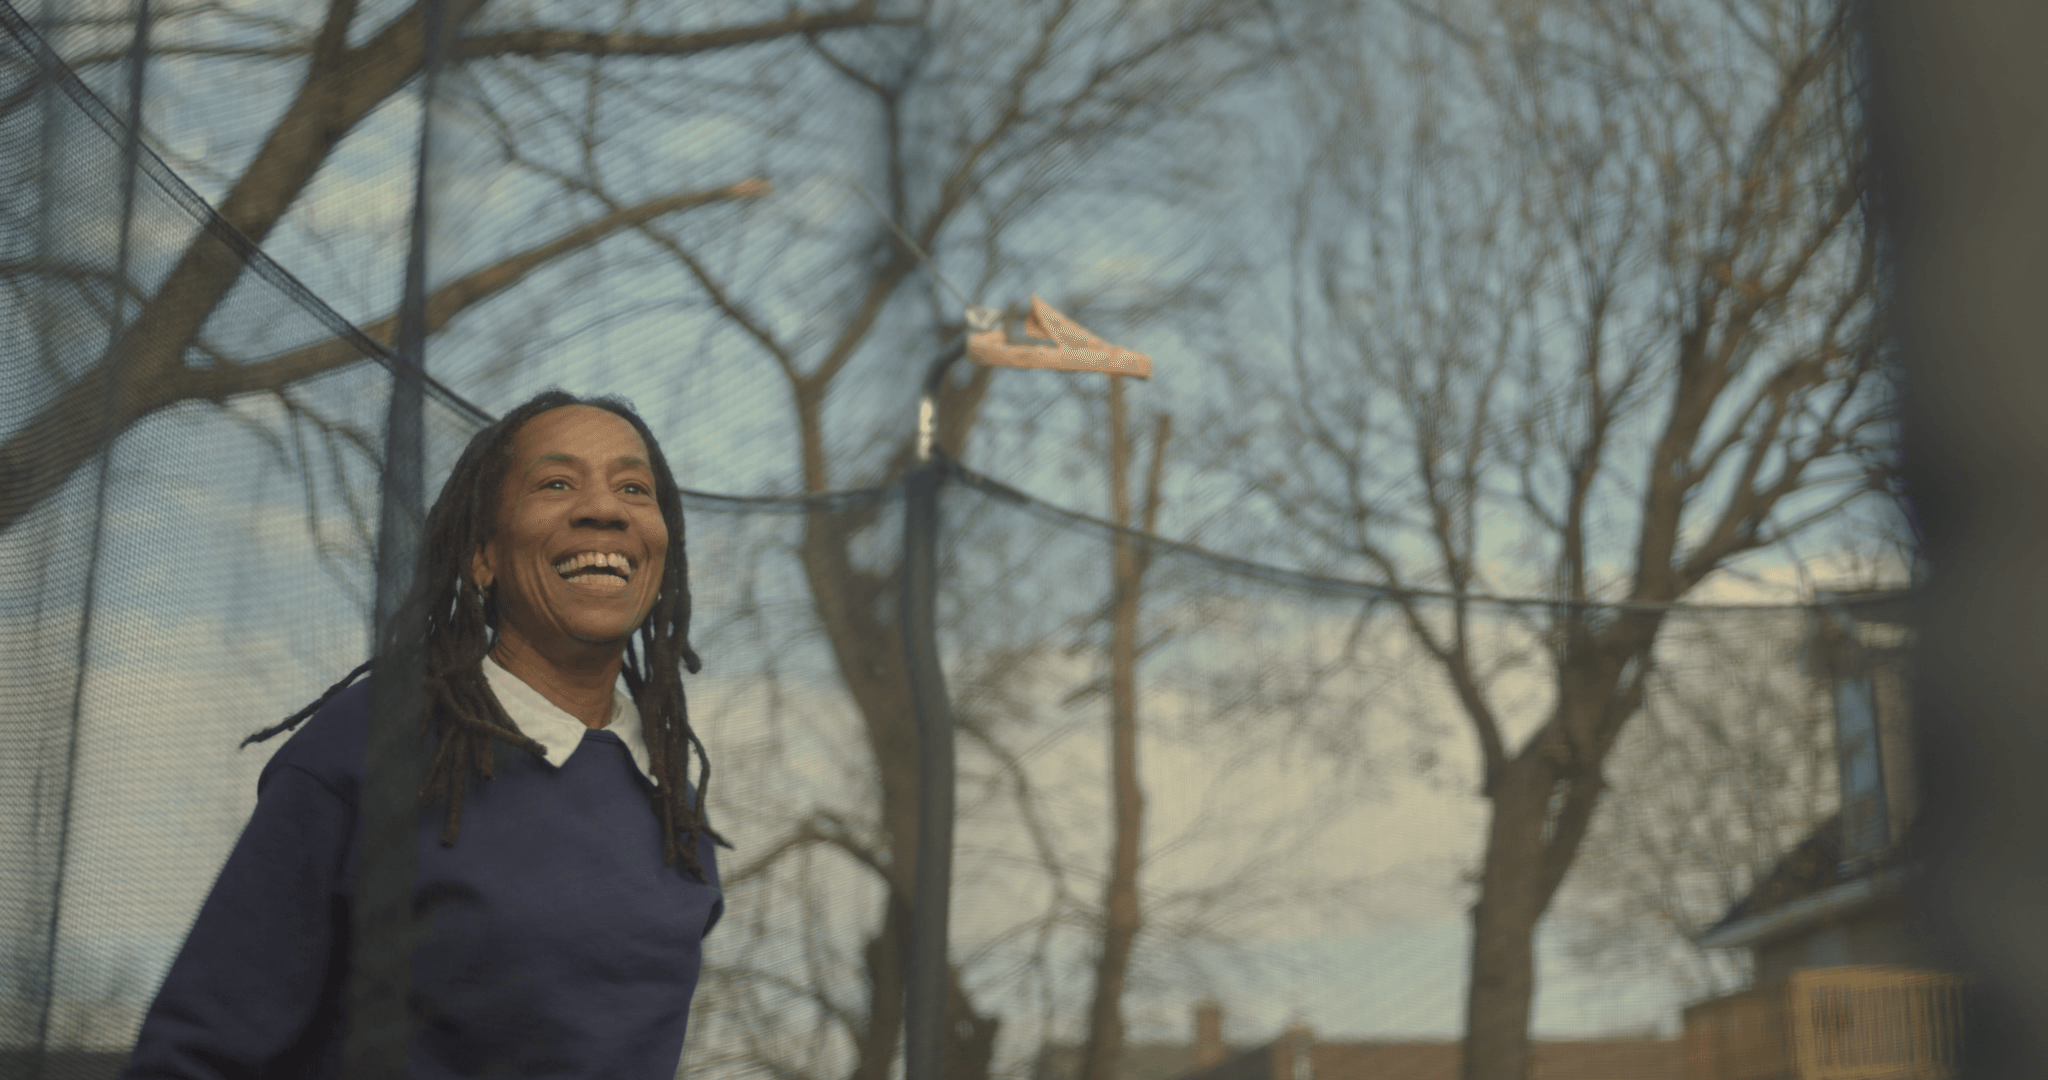 Still from I'm Free Now You Are Free. A woman with chest-length dreads and wearing a navy-blue sweater with a white-collared shirt, is smiling widely. She is seen through the mesh of a trampoline net.